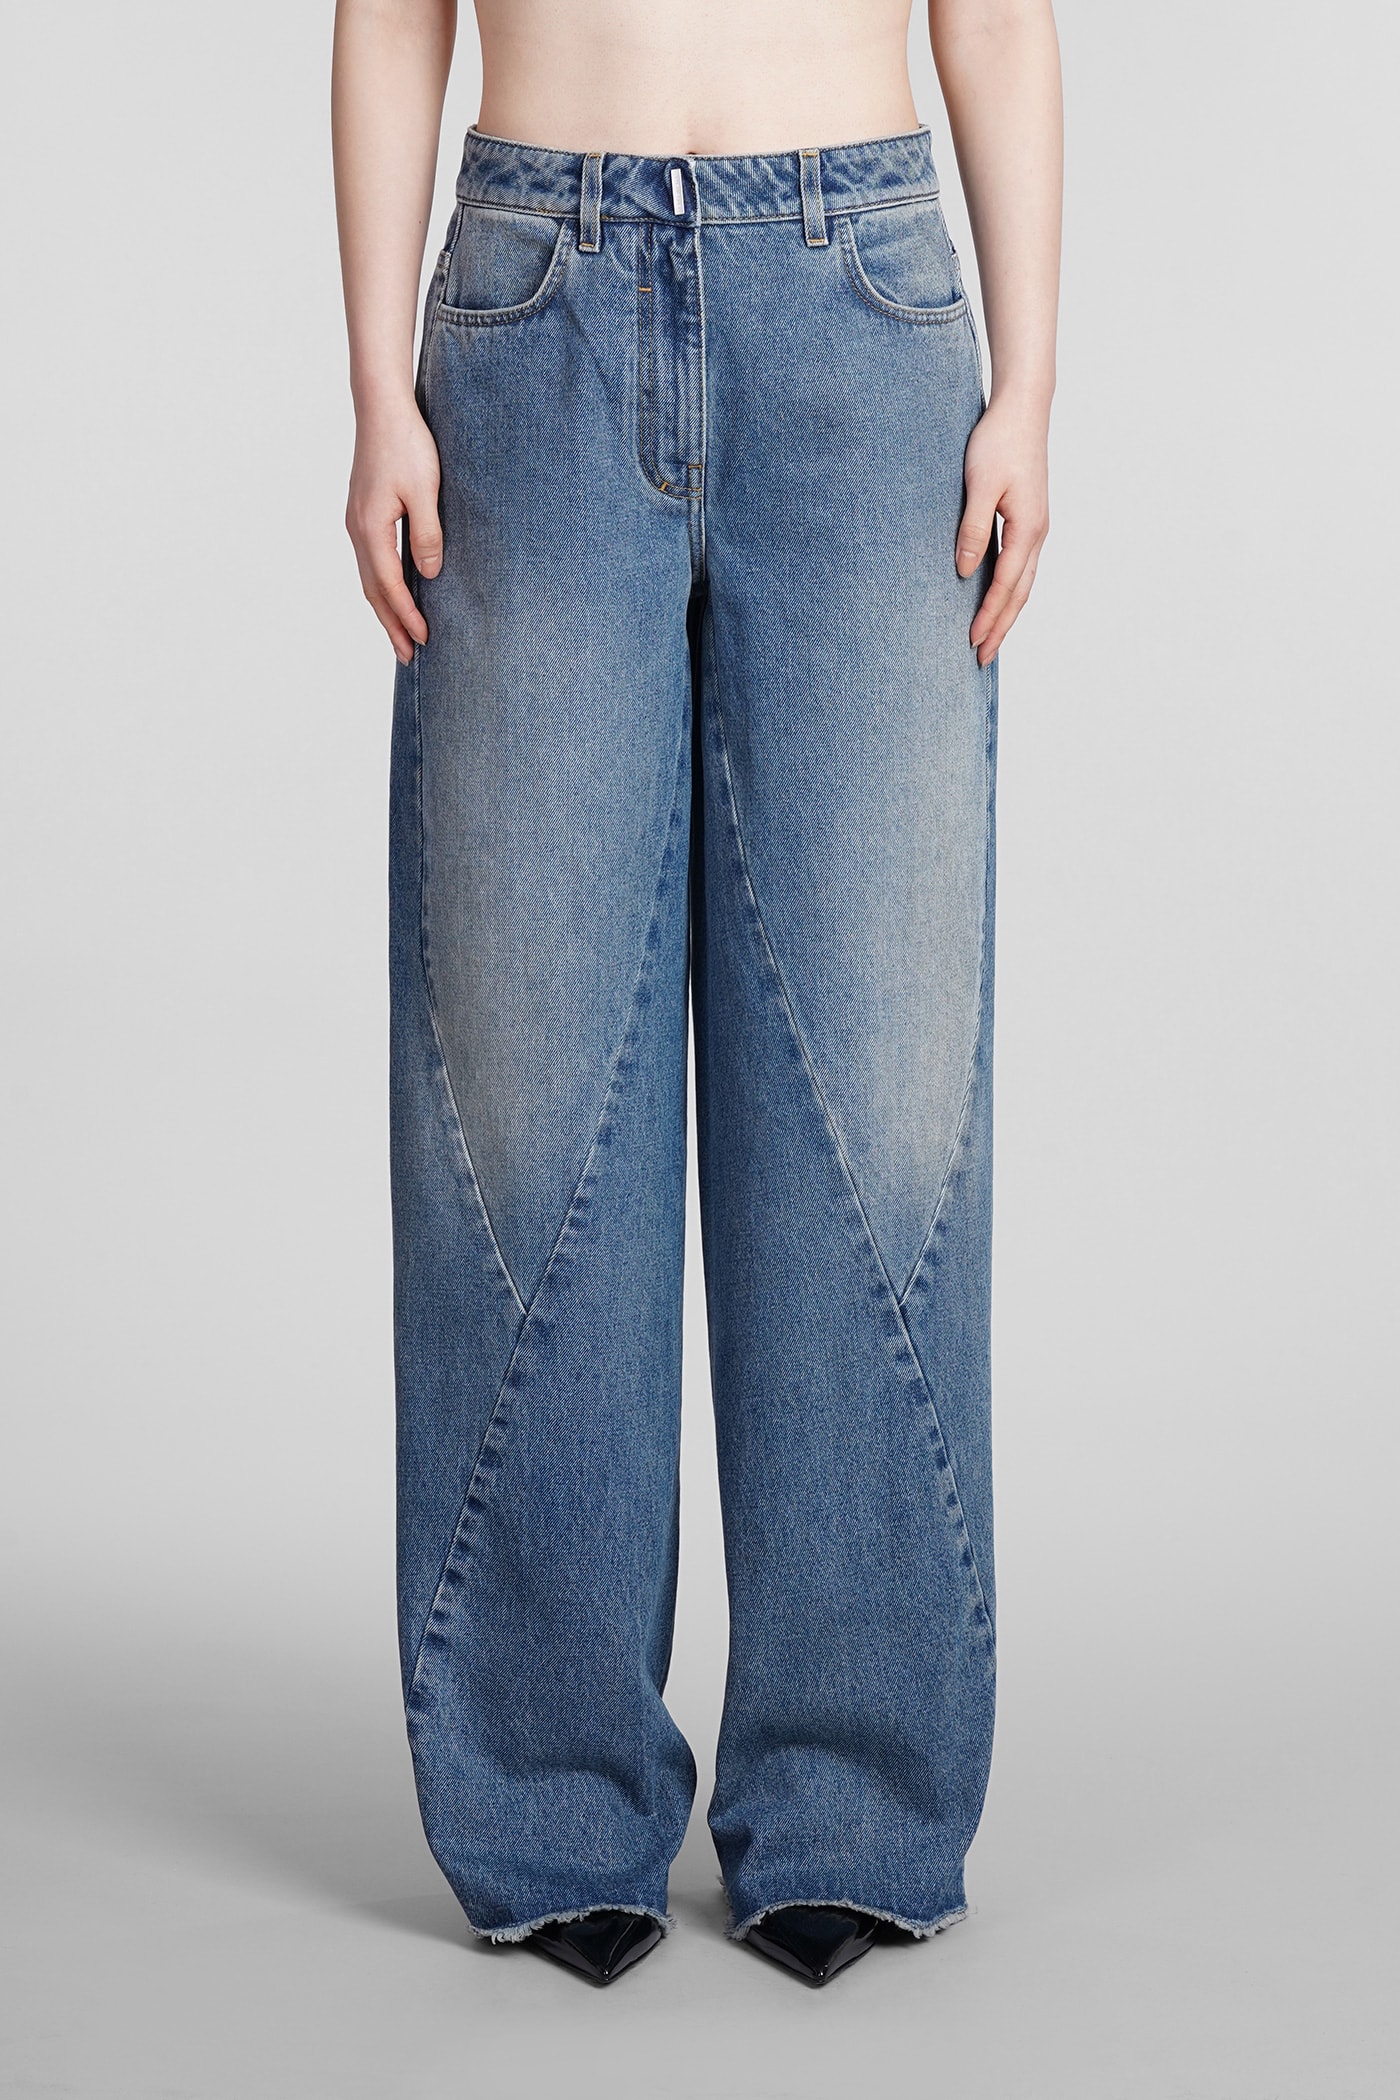 GIVENCHY JEANS IN BLUE COTTON